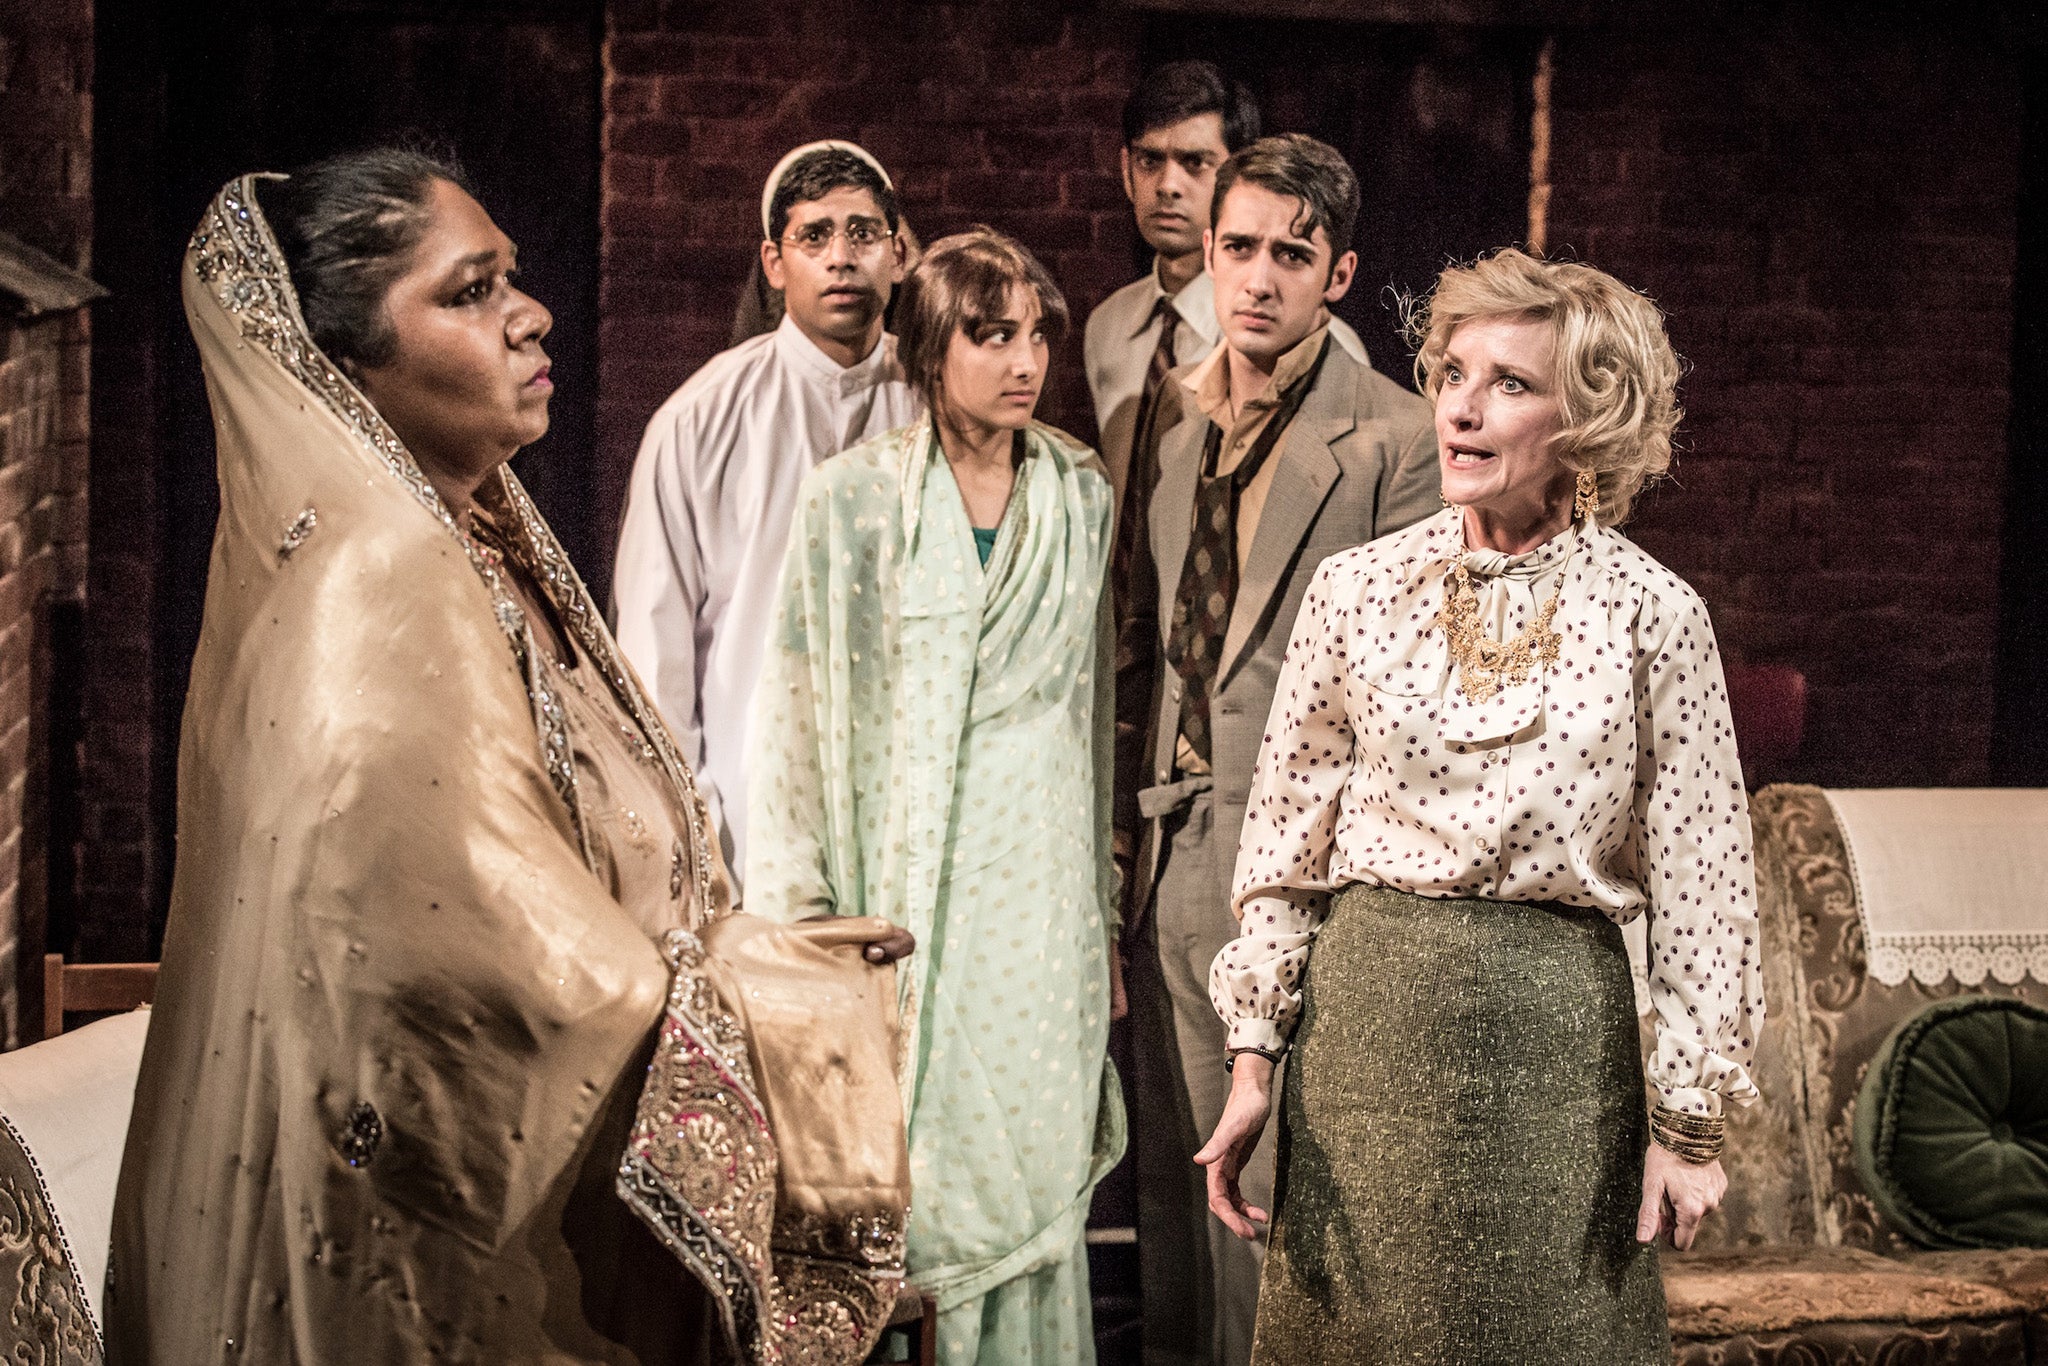 Jane Horrocks and the rest of the cast in a terrific revival of East is East